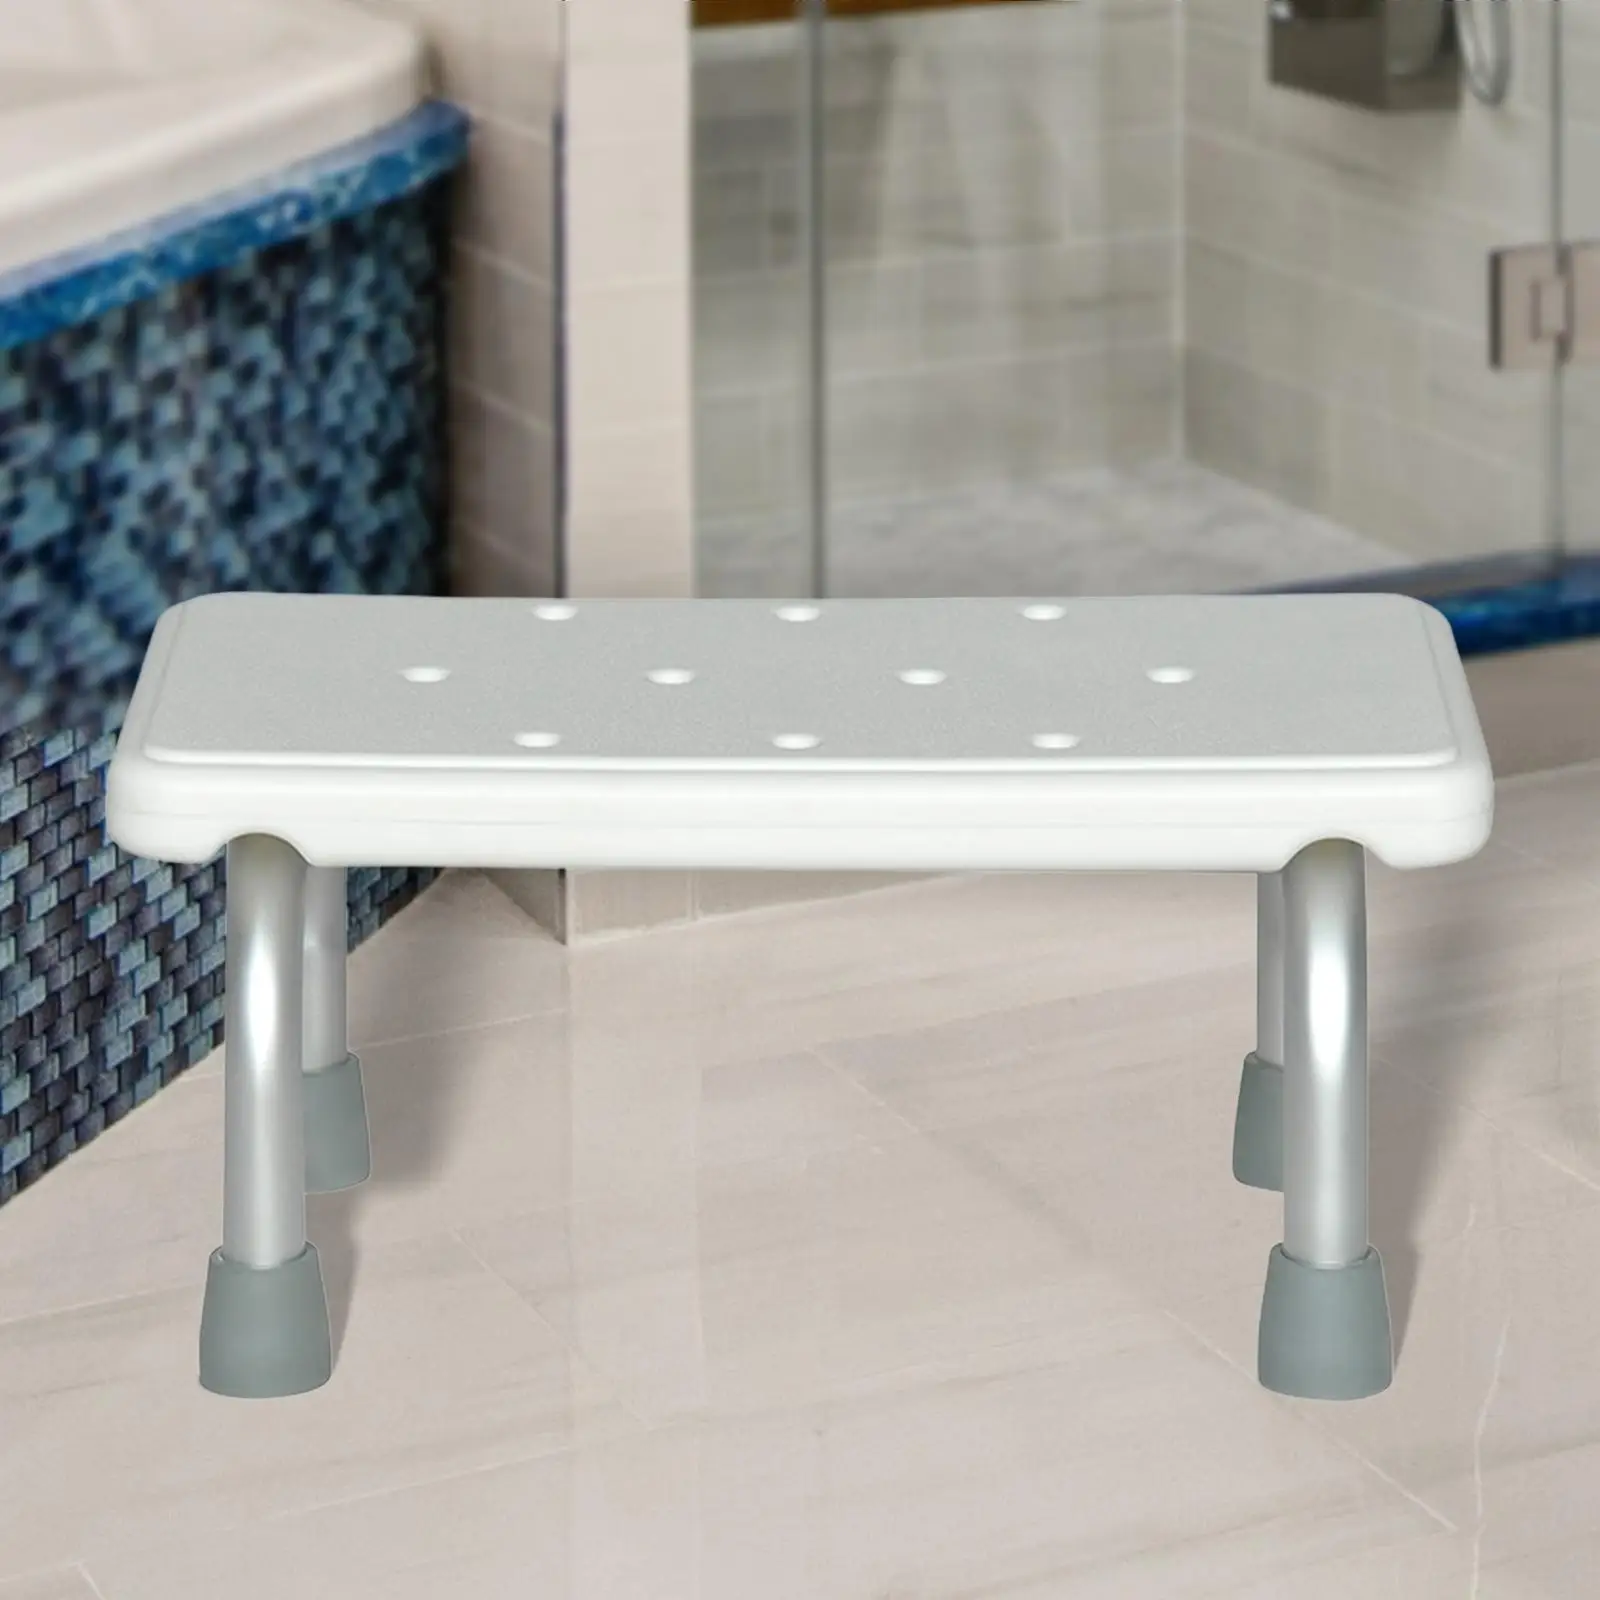 Shower Bench Washable Step Stool Sturdy with Anti Slip Rubber Tips Bathtub Seat Bath Seat Bath Bench for Adults and Kids Bedroom